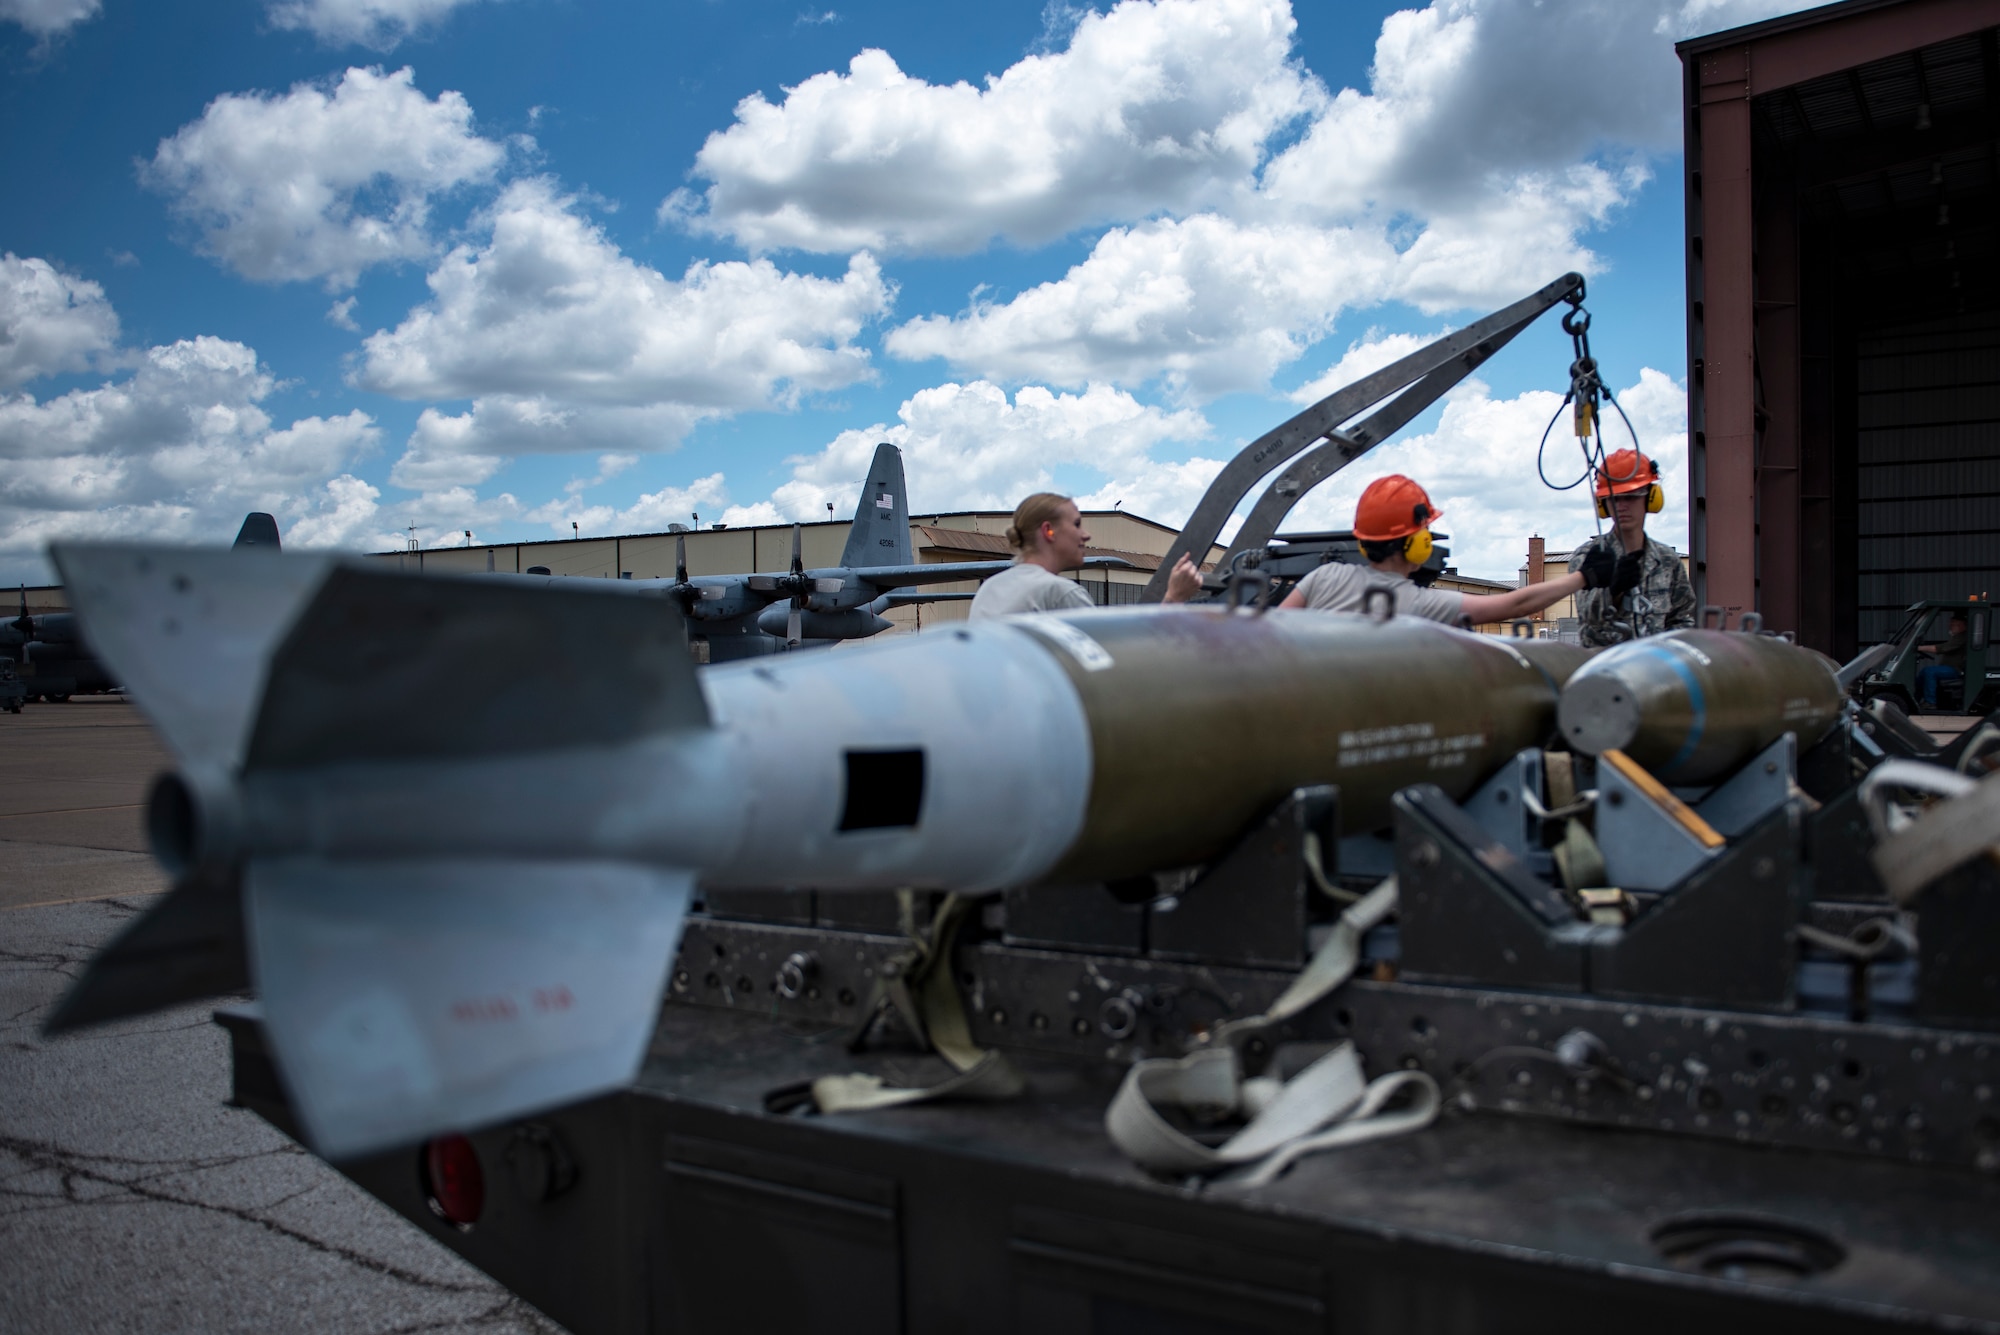 363rd Training Squadron munitions apprentice course students attach a Mark 82 training bomb to an MJ-1 ammunition loader while their instructor, left, supervises at Sheppard Air Force Base, Texas, June 7, 2019. The students actually built the bombs before and are now performing a crossload, which moves the bombs from one trailer to another. A crossload is performed when a trailer is either scheduled for maintenance or due to mission requirements must be moved. (U.S. Air Force phoot by Airman 1st Class Pedro Tenorio)